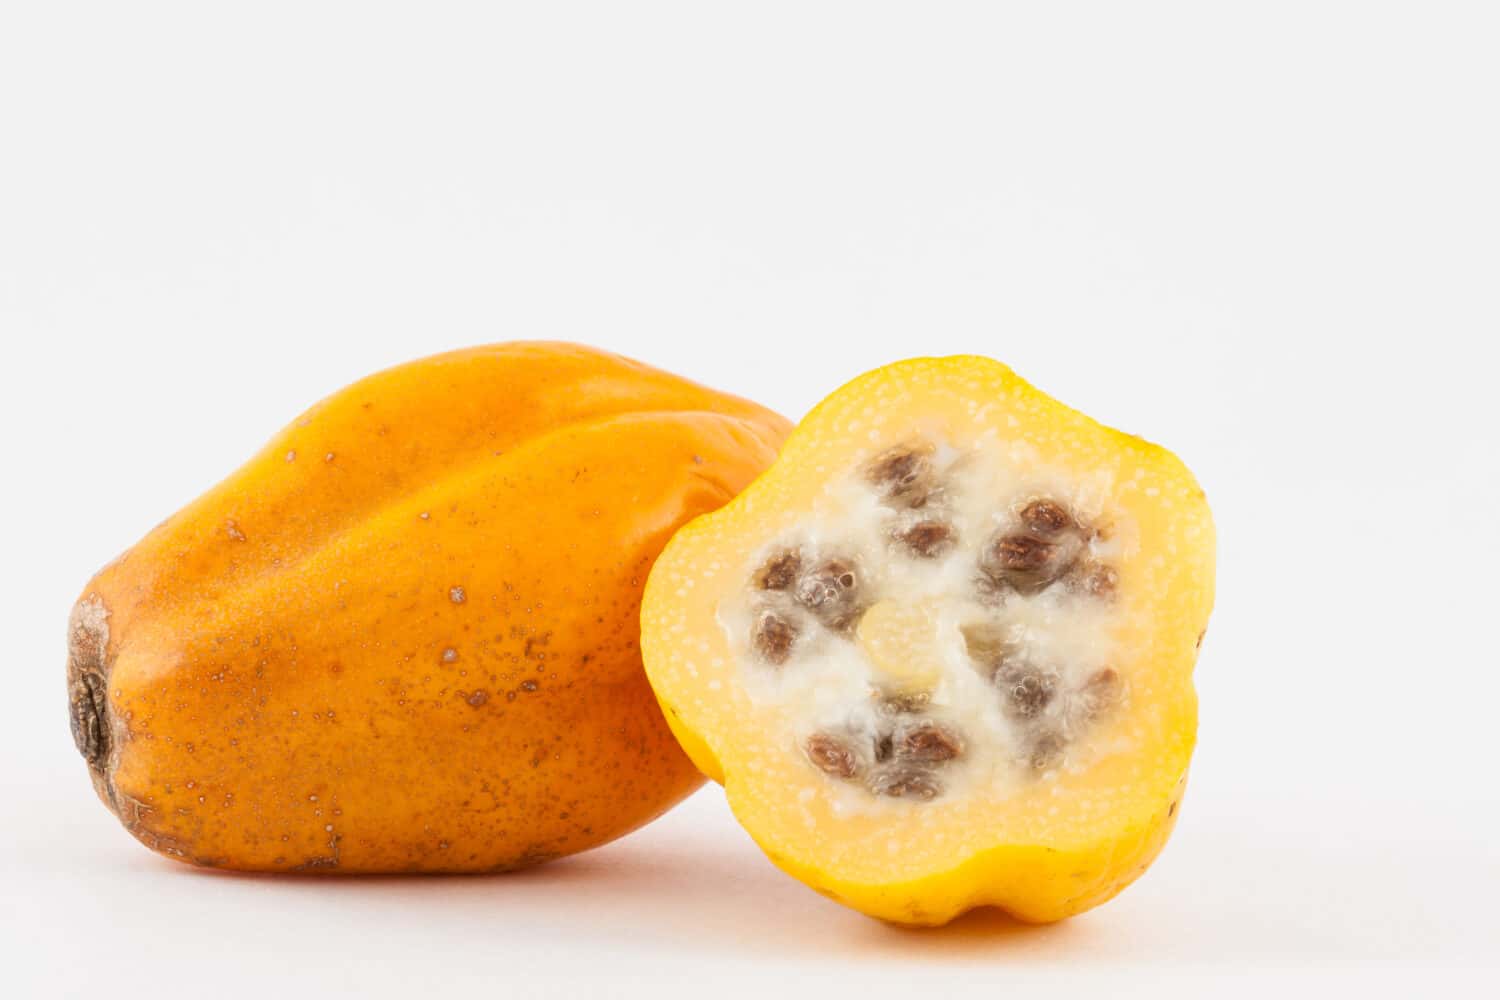 Mountain papaya (Vasconcellea pubescens) isolated in white background